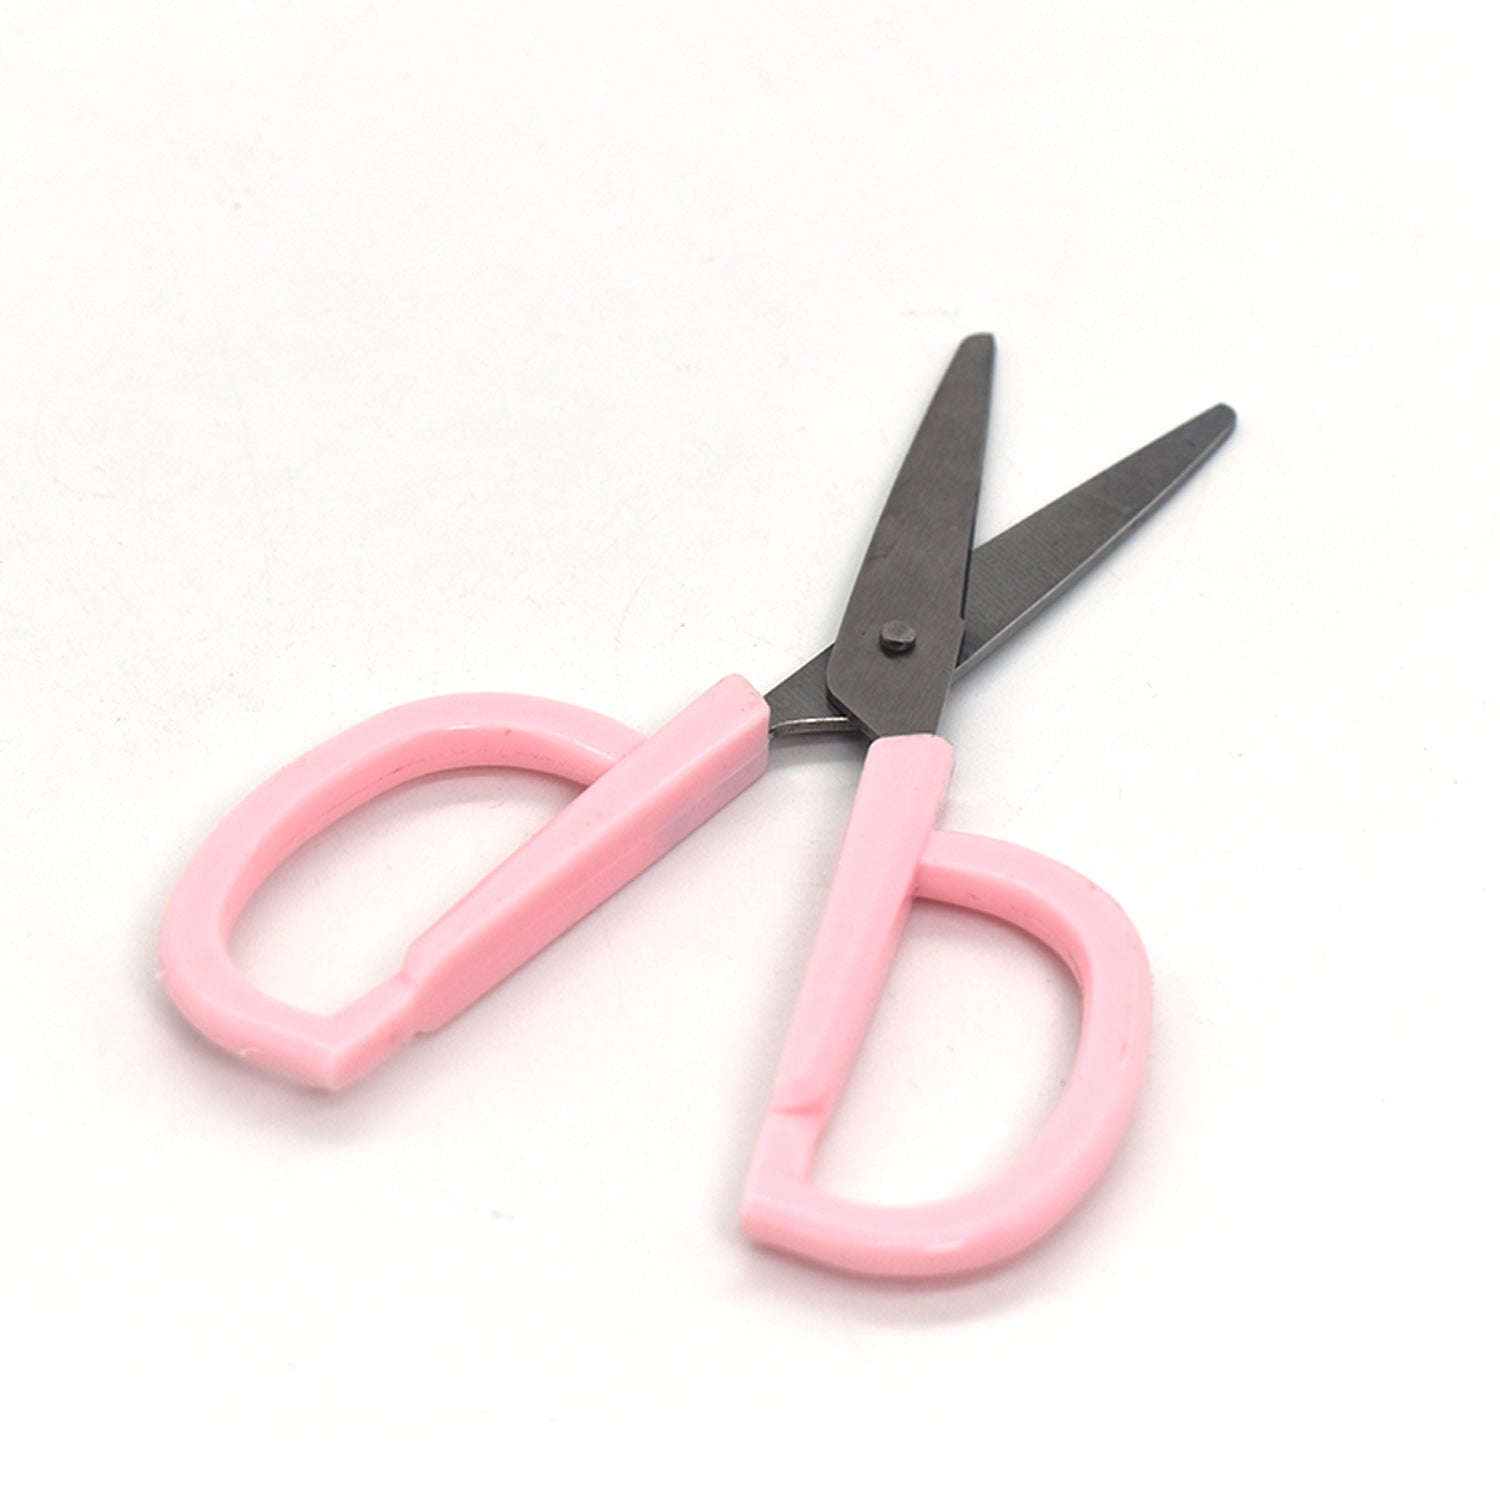 7441 Multipurpose Scissors Comfort Grip Handles Used in Home and Office